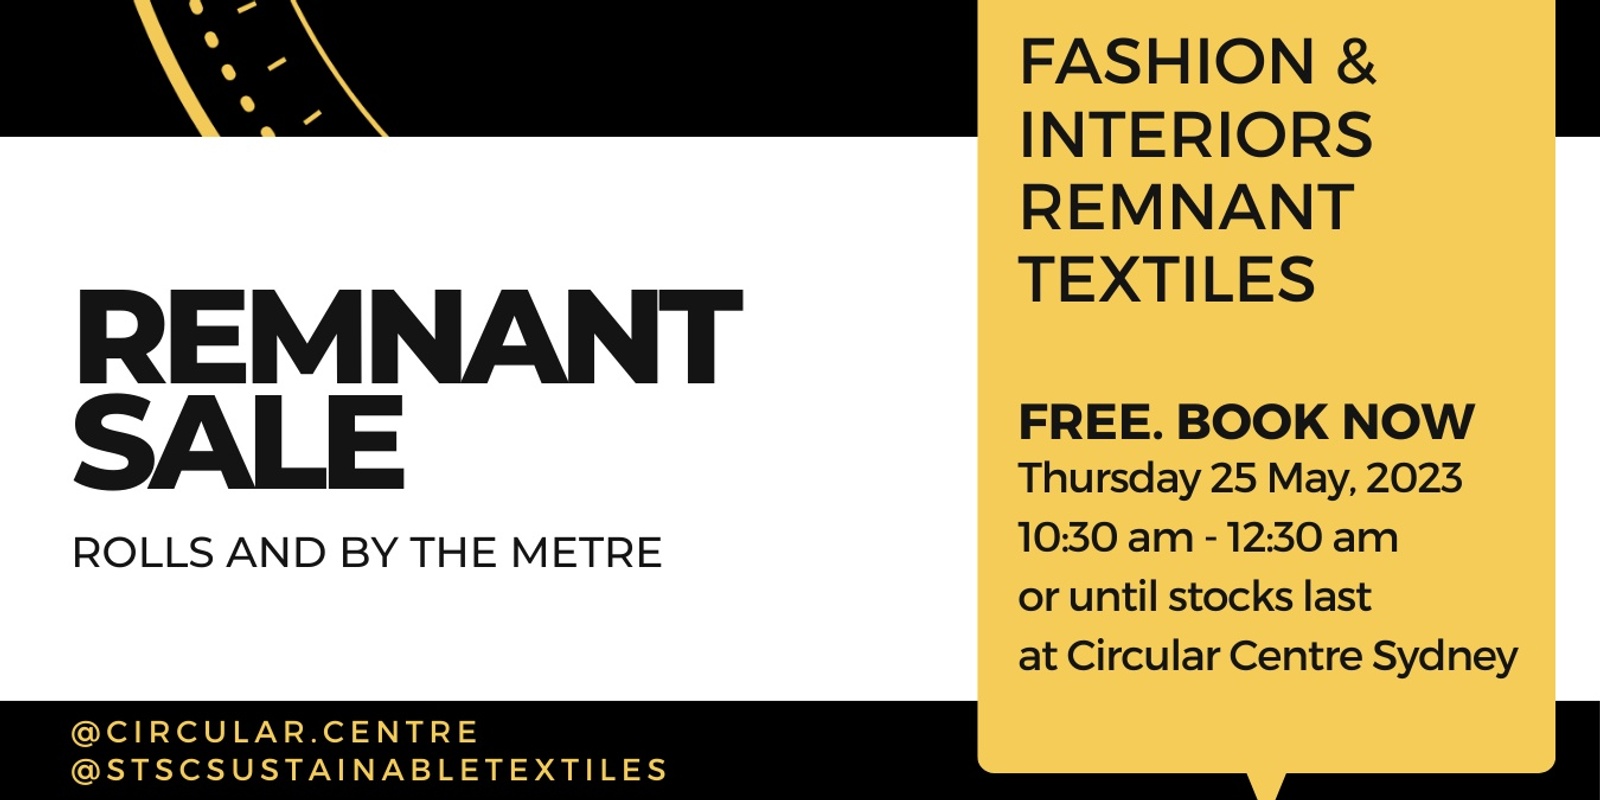 REMNANT TEXTILE SALE. Free by appointment only